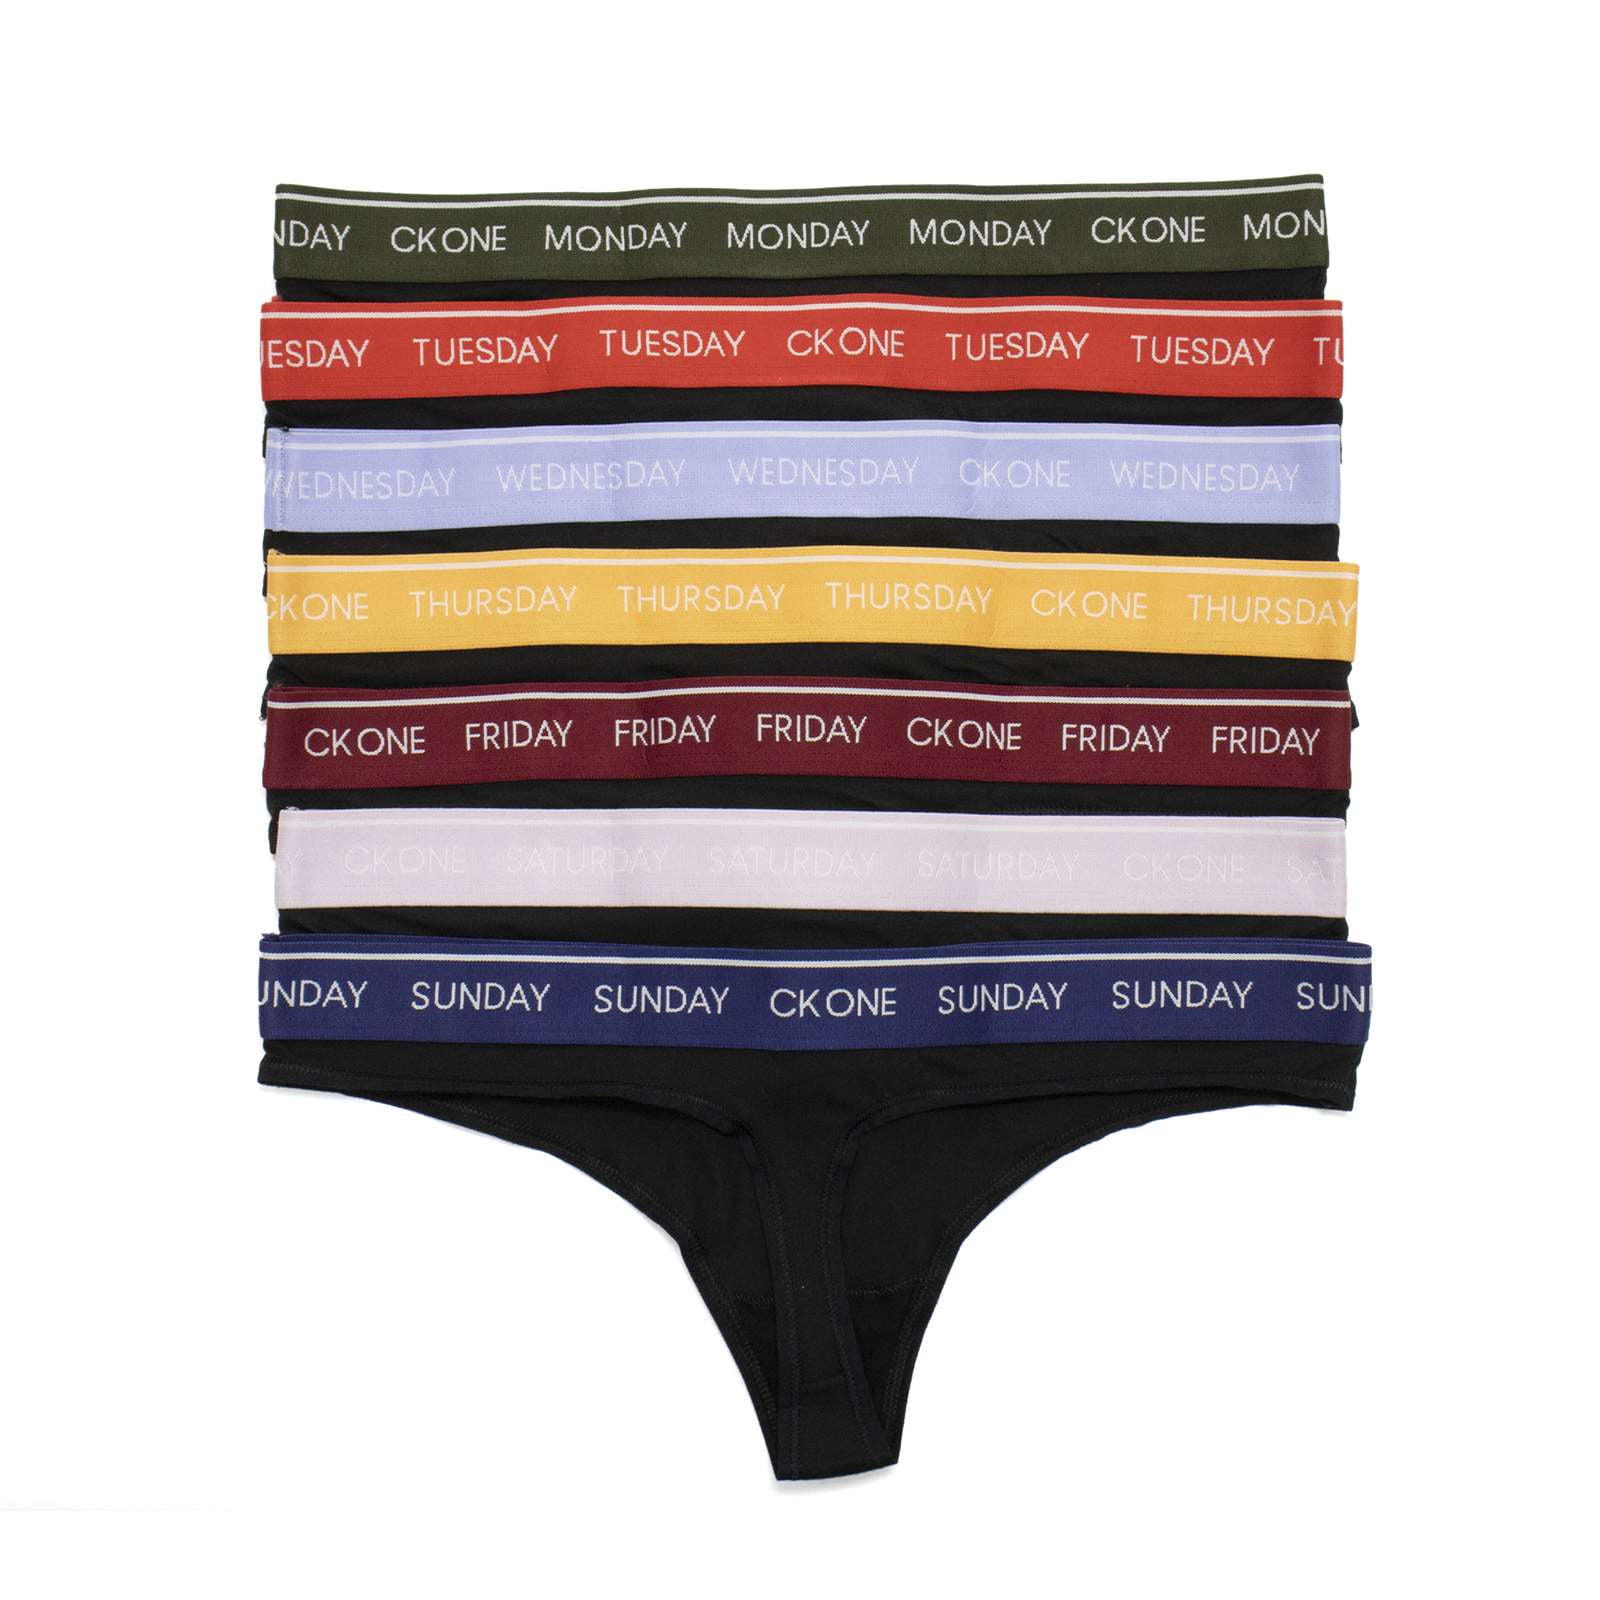 Buy Calvin Klein Women's CK One Days of The Week Thong 7 Pack, Black, S at